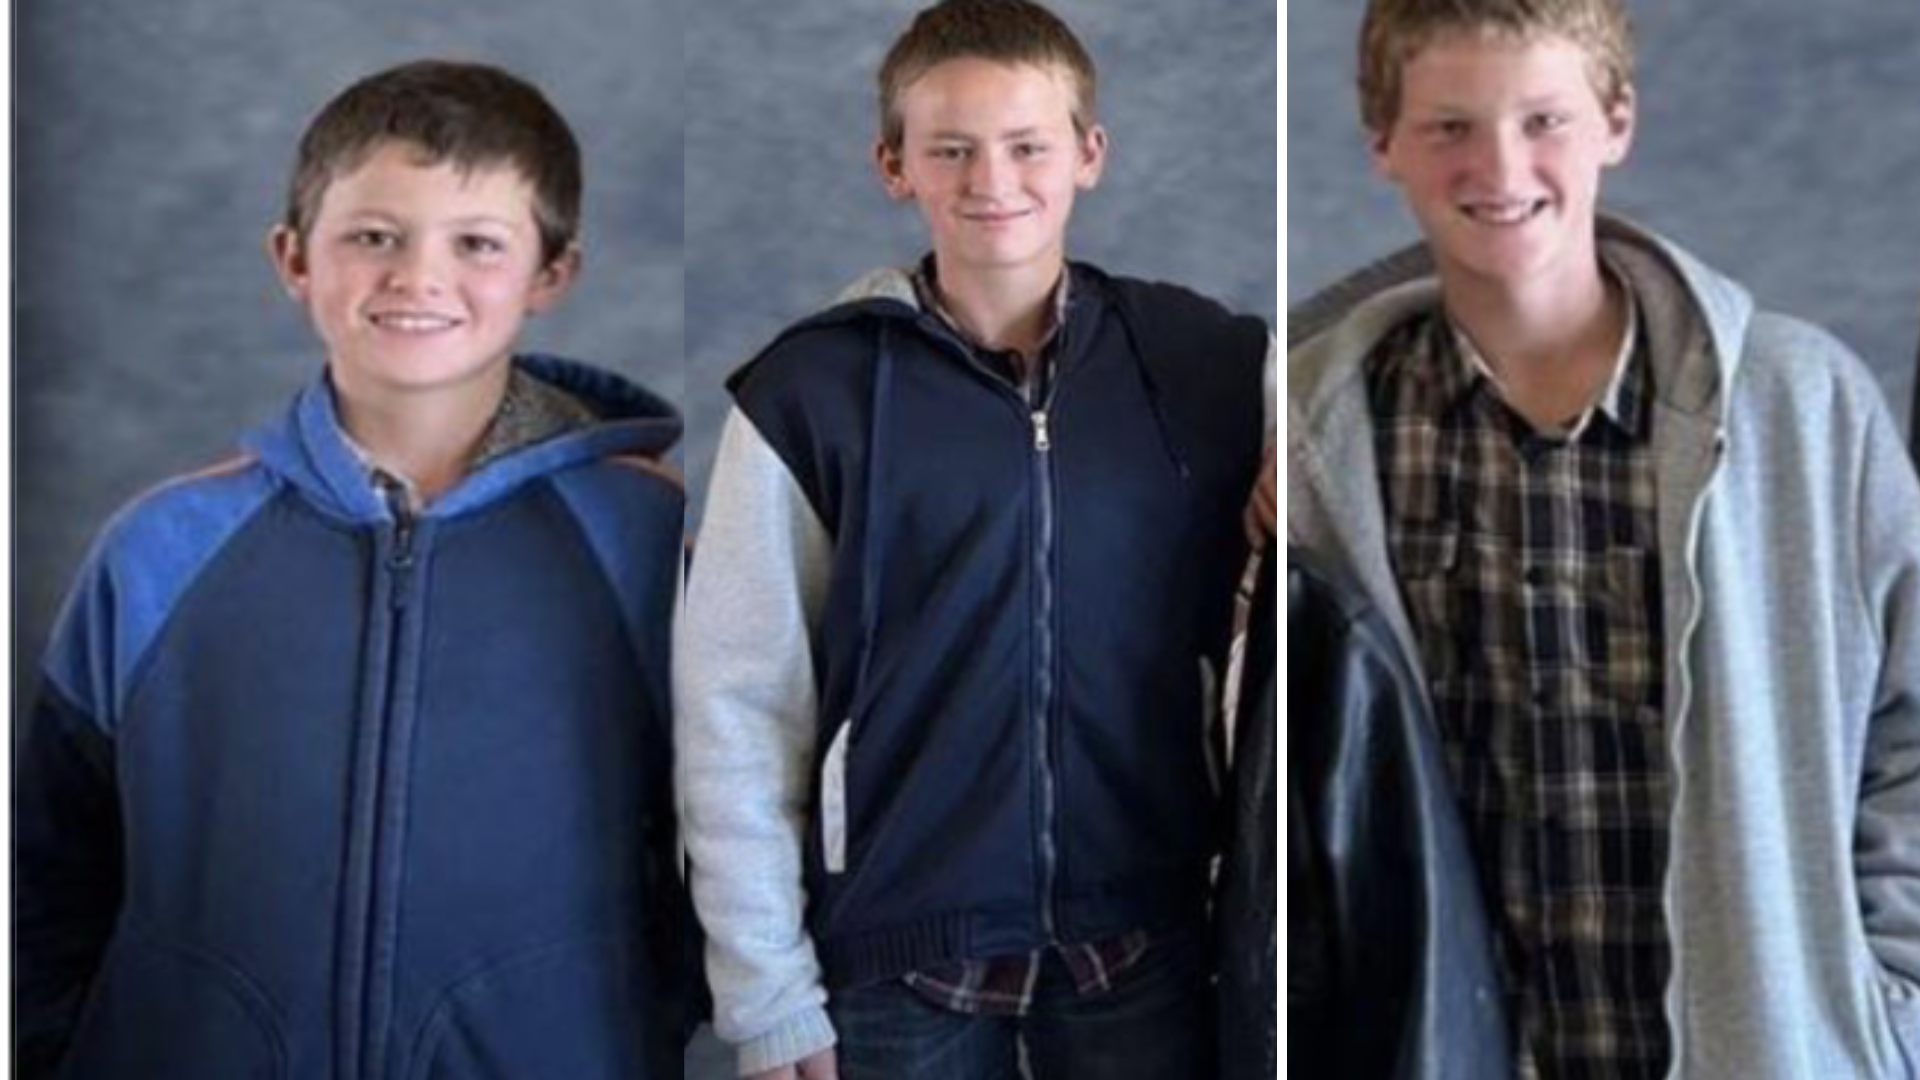 Three brothers are still missing after leaving their home over two weeks ago on Oct. 29....